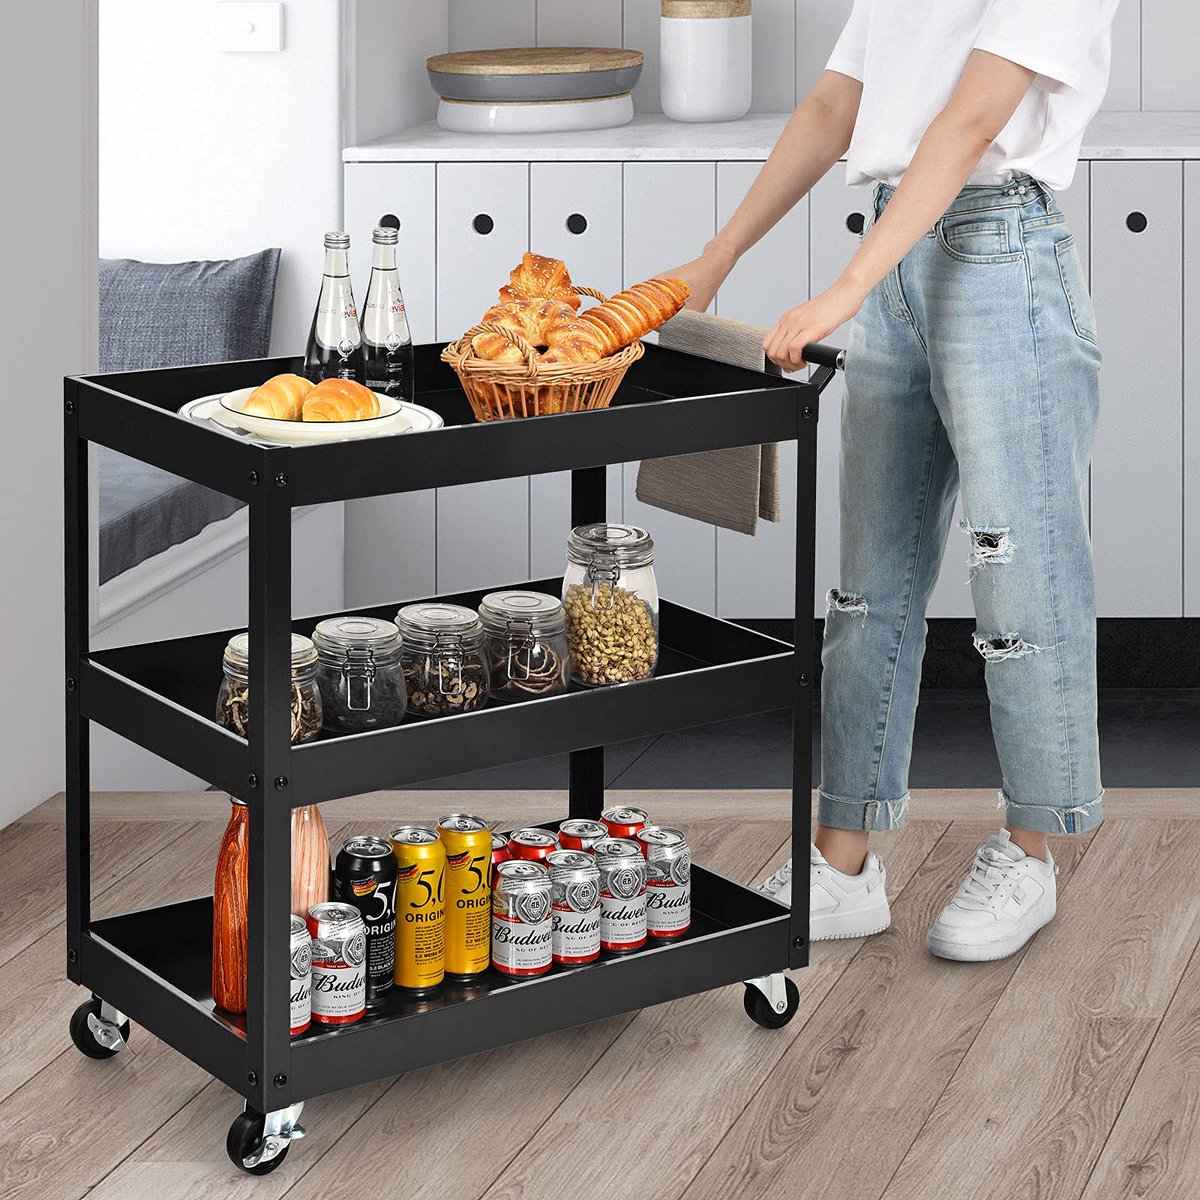 This 3-tier rolling tool cart will be a good transportation helper in your work area.🕶
Search shopping item ID: 608564986589
Use the code: social save 5% off

#Goplus #UtilityCart #ToolCart #CommercialService #followforfollowback #followus #follow4like #likeforlikes